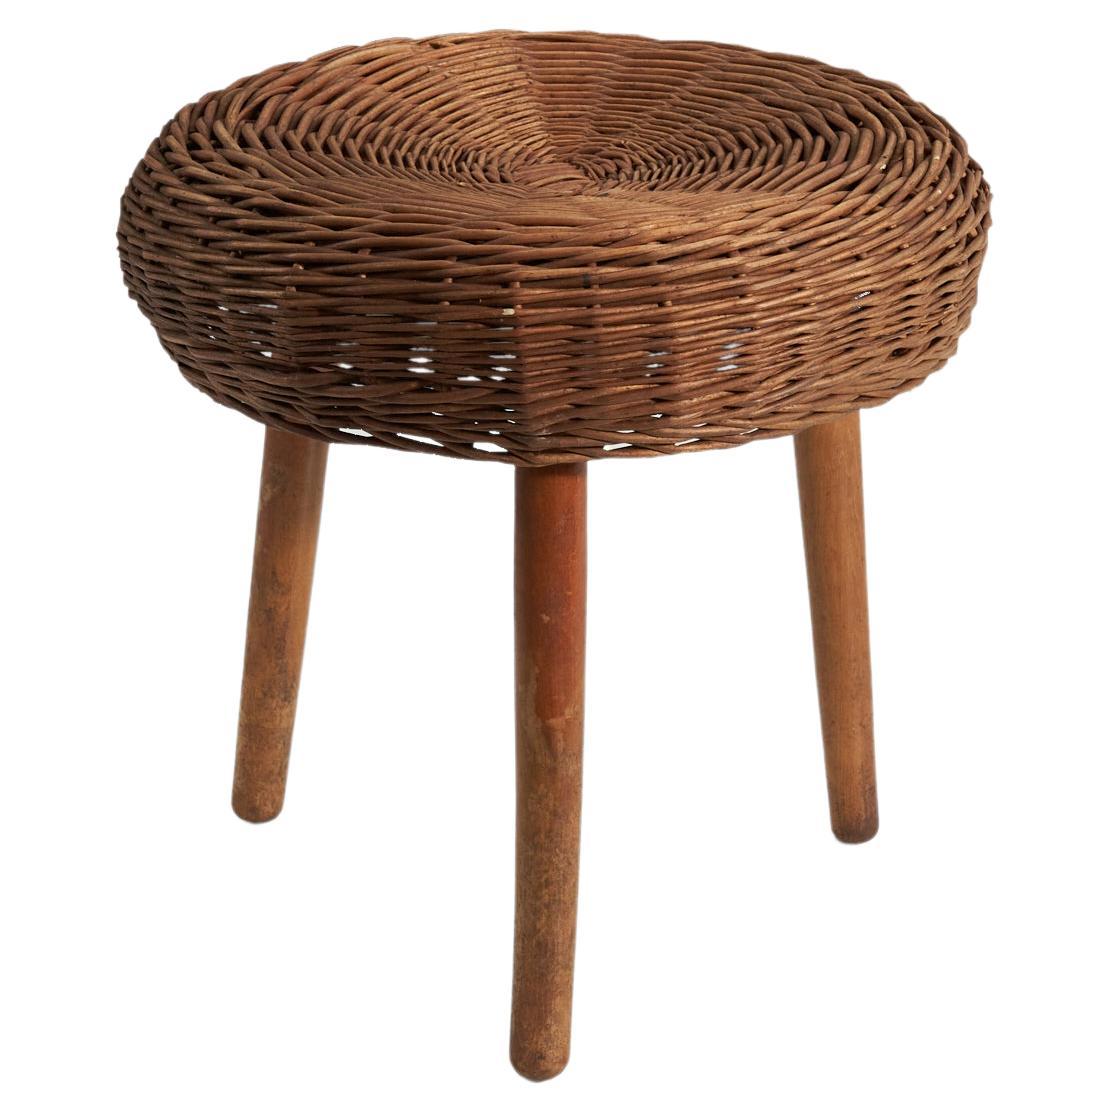 Tony Paul 'Attributed' Stool, Wicker, Wood, United States, 1950s For Sale